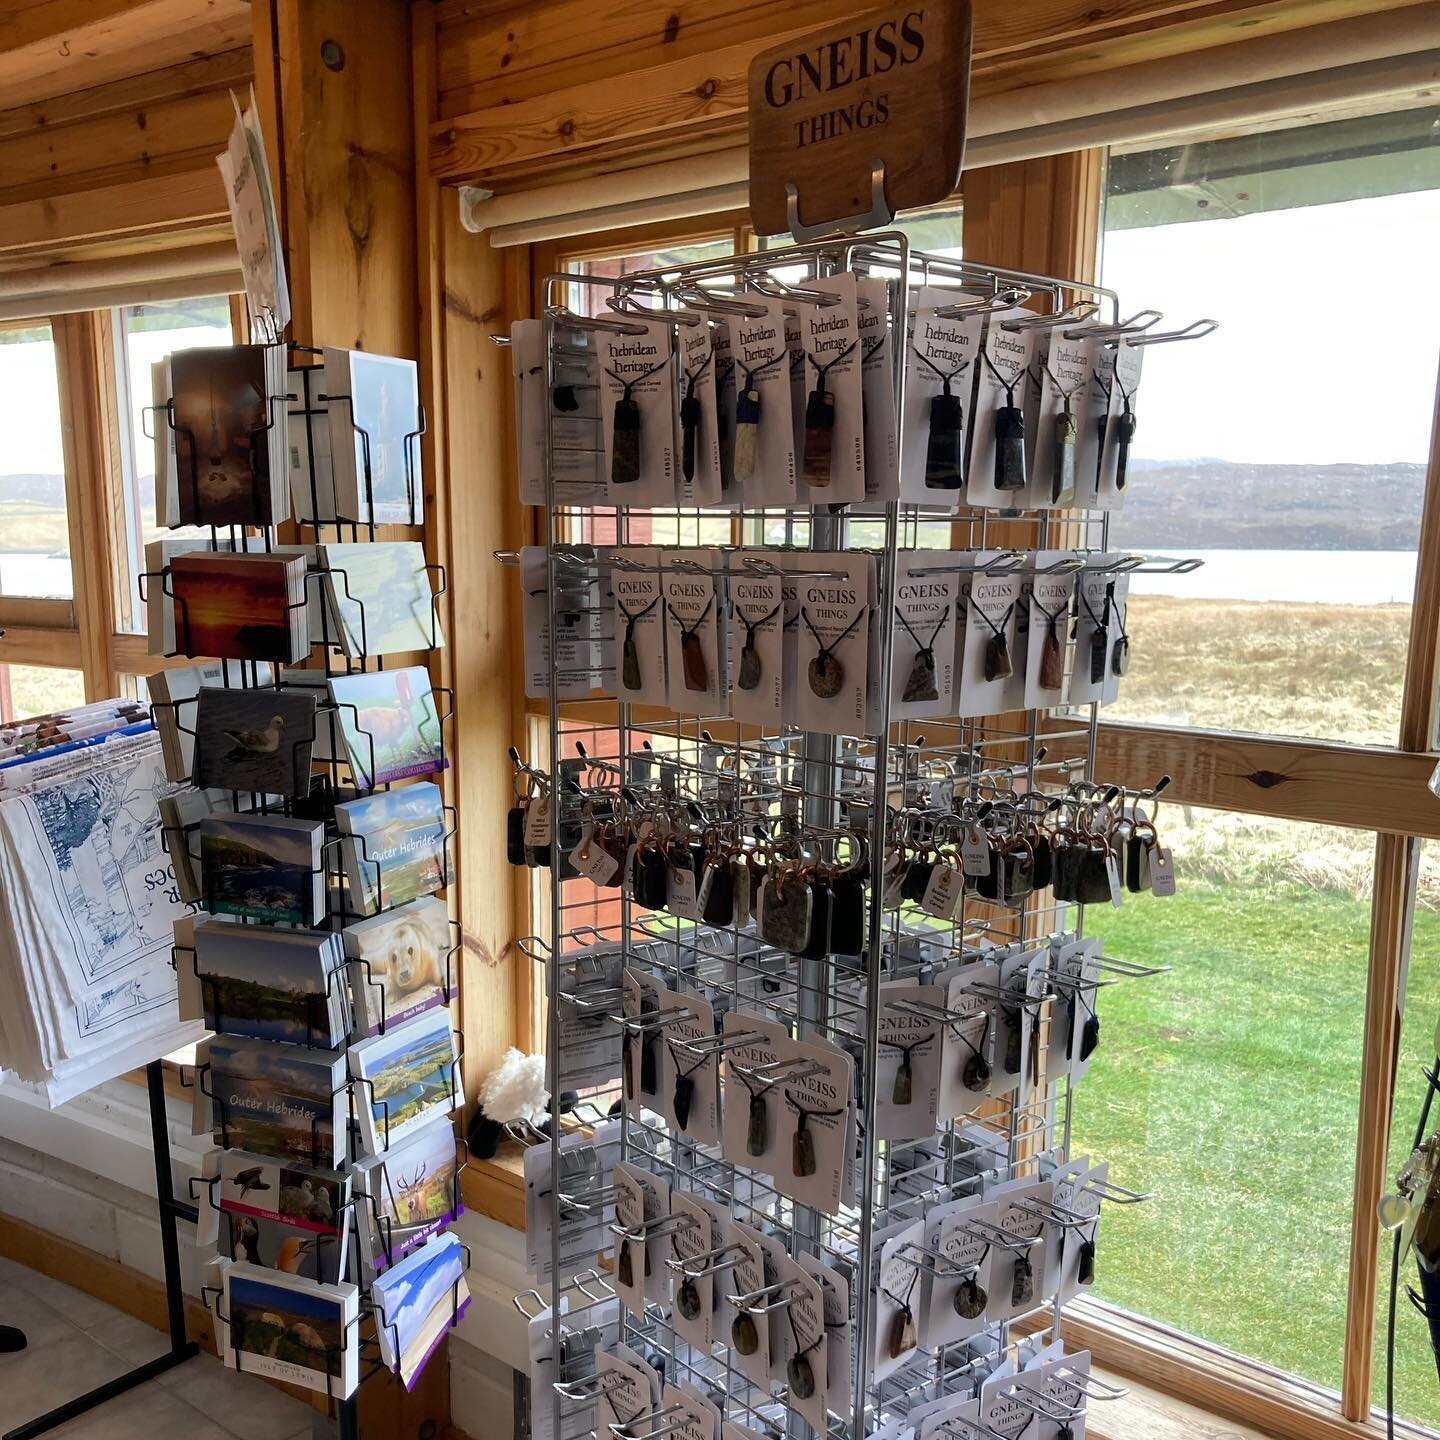 It&rsquo;s great to be back in Callanish visitors centre for their temporary shop offering. Local stone jewellery, at the Standing Stones!

#standingstones #callanishstones #jewellery #isleoflewis #outerhebrides #visitouterhebrides #stonecarving #sma